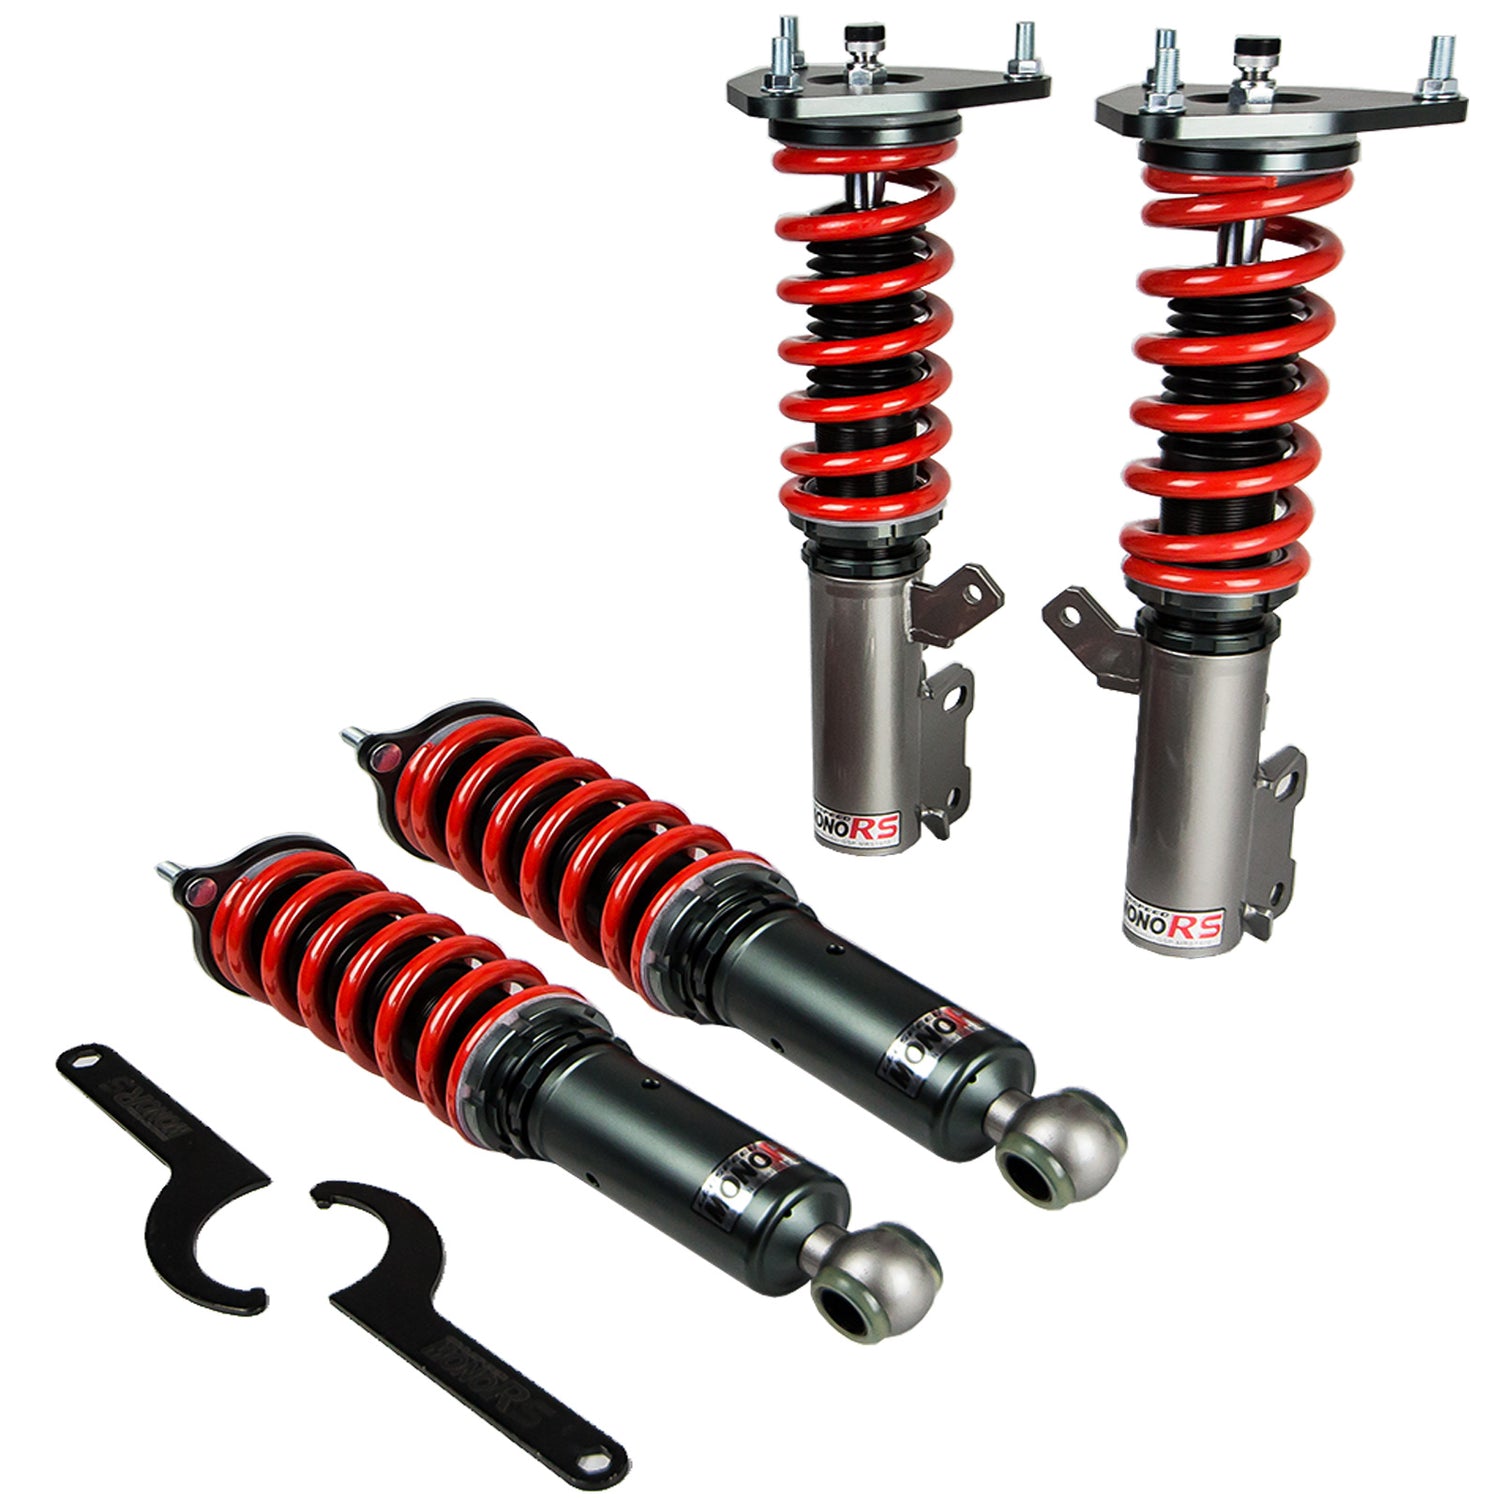 Godspeed MRS1970-B MonoRS Coilover Lowering Kit, 32 Damping Adjustment, Ride Height Adjustable